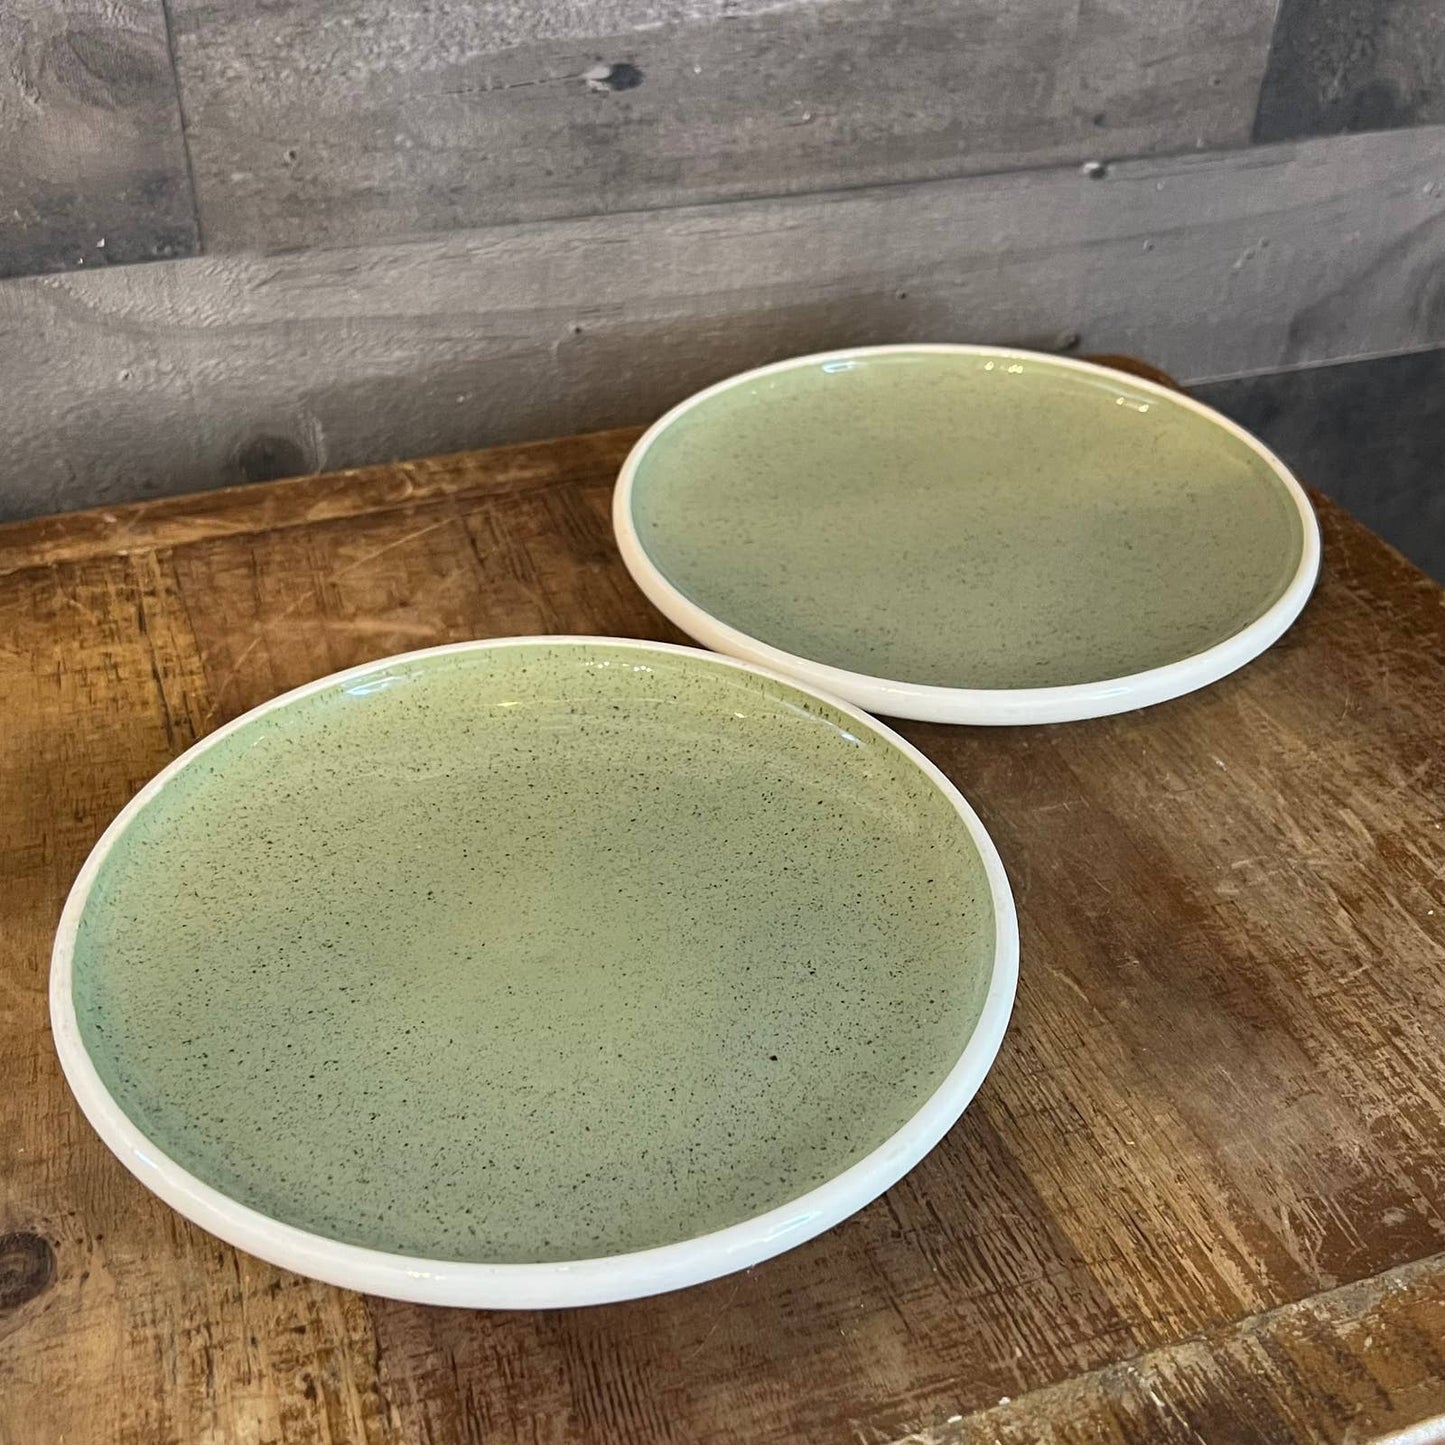 Vintage pair of Harkerware by Russel Wright green plates